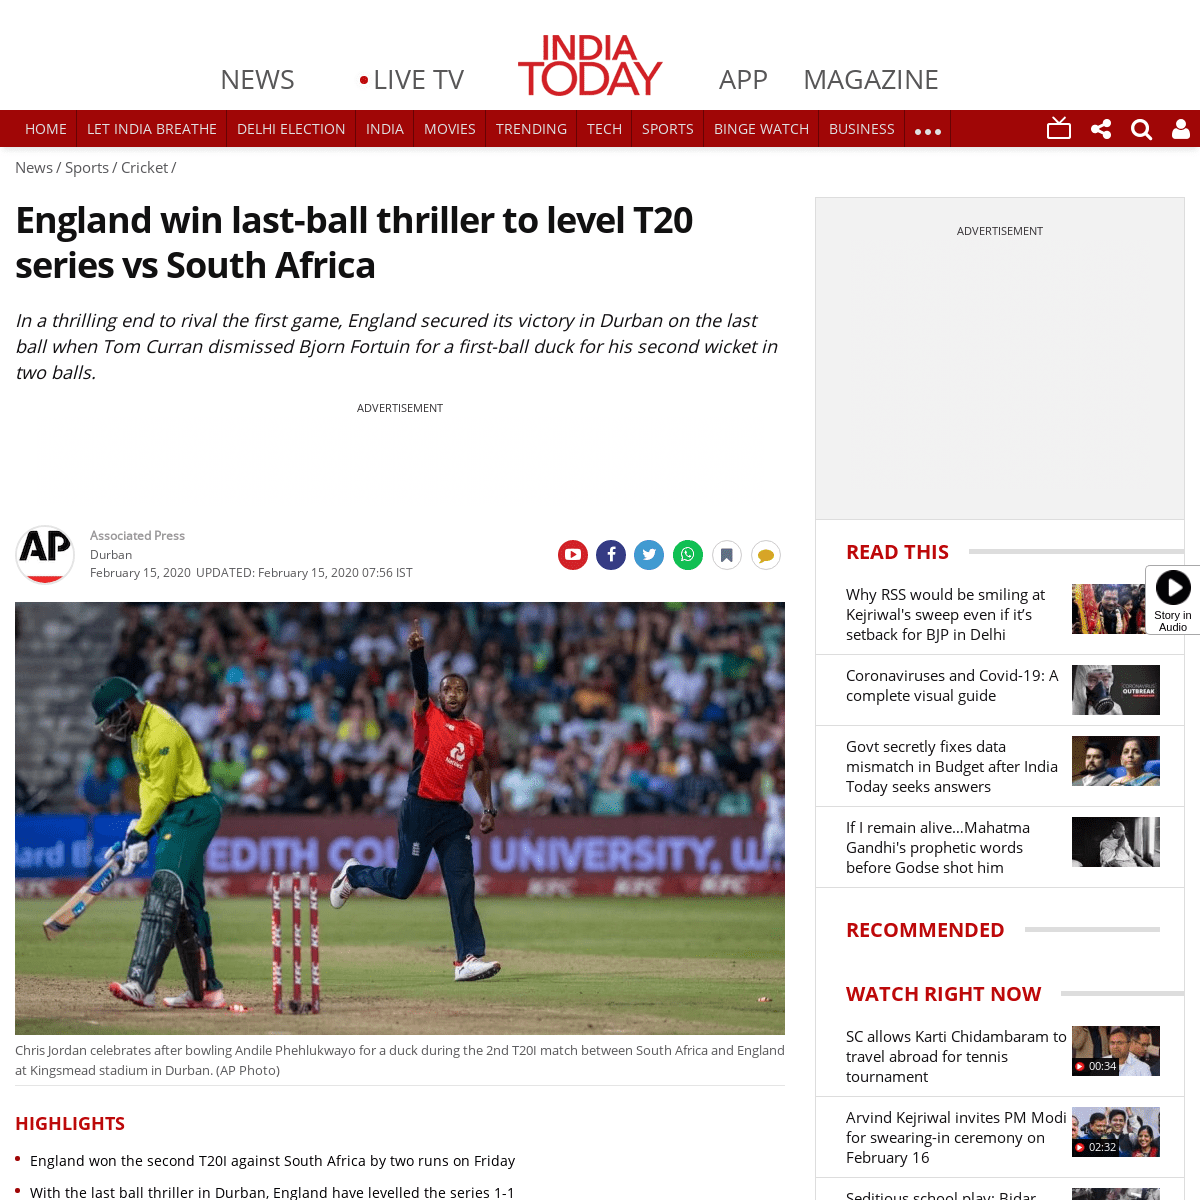 A complete backup of www.indiatoday.in/sports/cricket/story/england-win-last-ball-thriller-level-series-vs-south-africa-1646652-